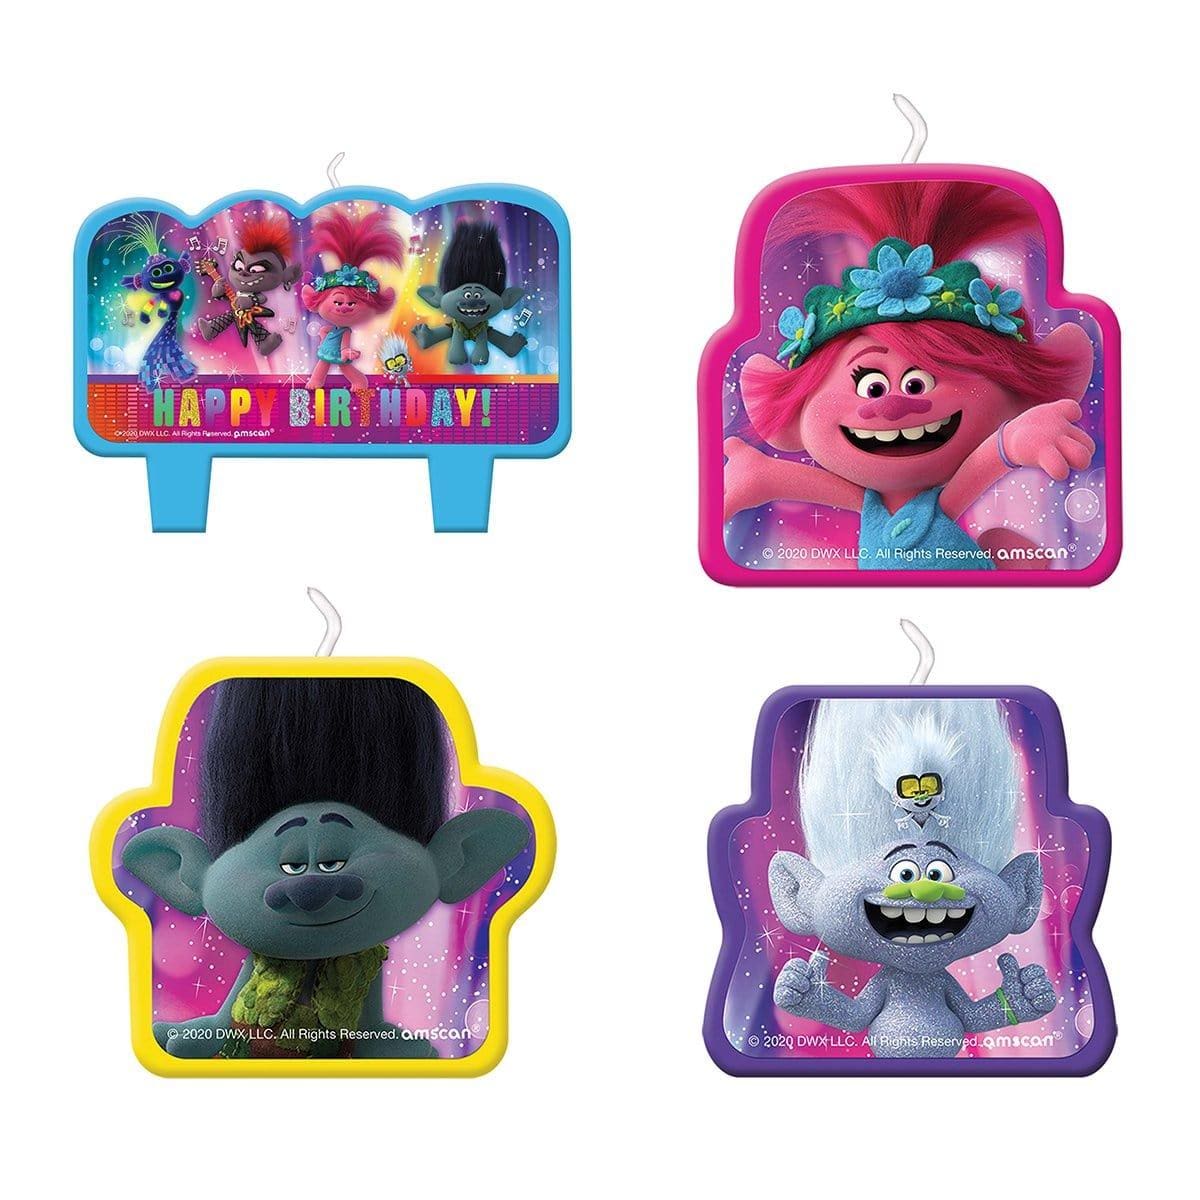 Buy Kids Birthday Trolls World Tour candles, 4 per package sold at Party Expert